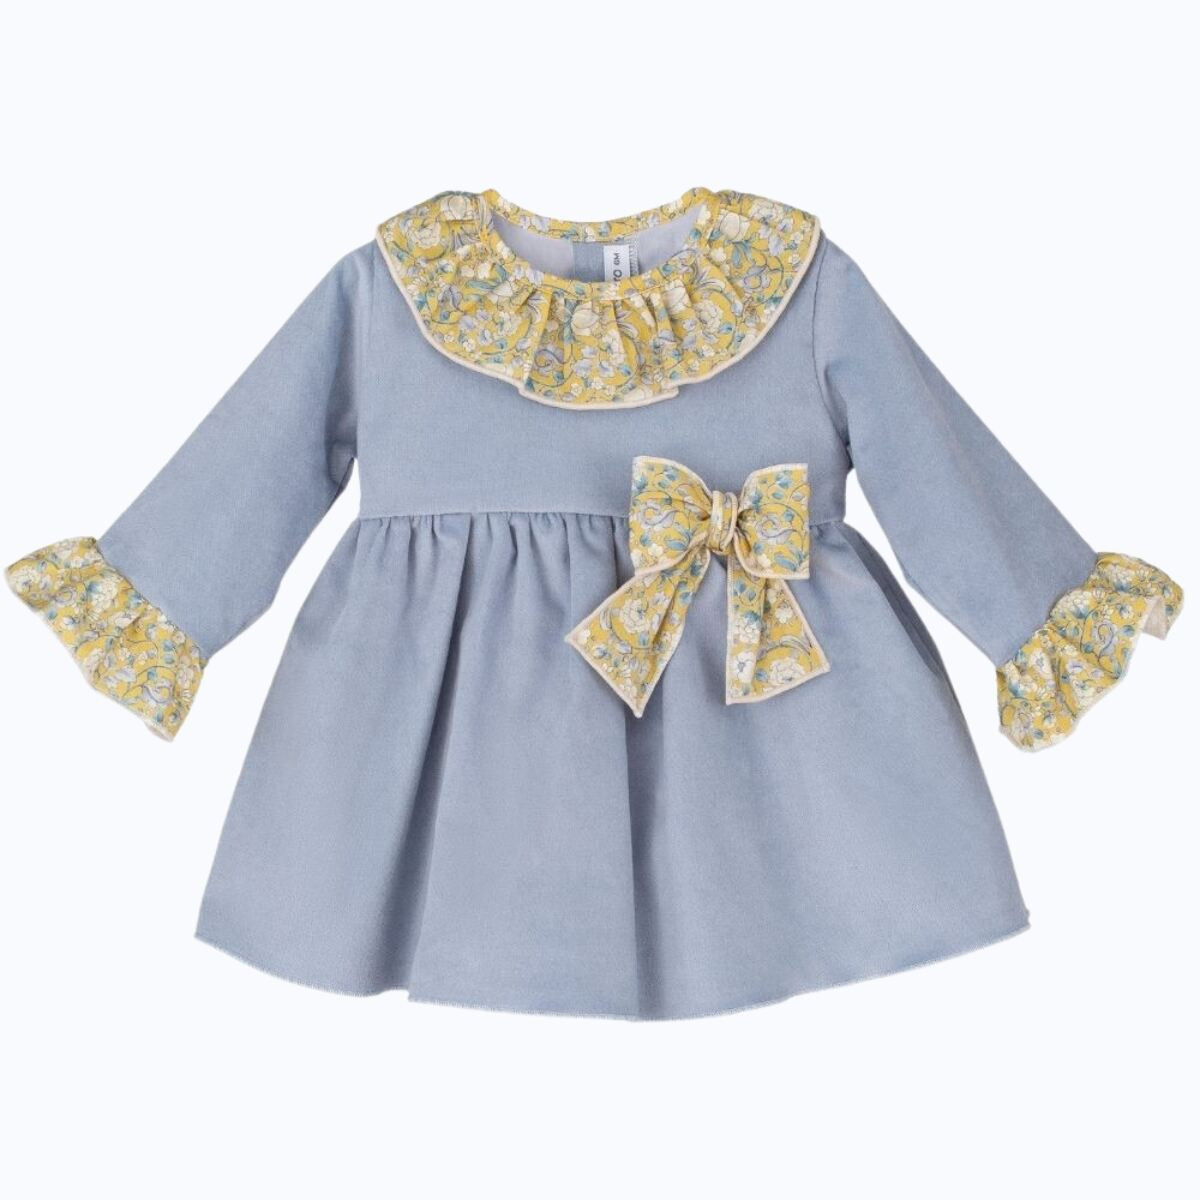 DRESS WITH PRINTED FRILLED NECK AND BOW CALAMARO - 2